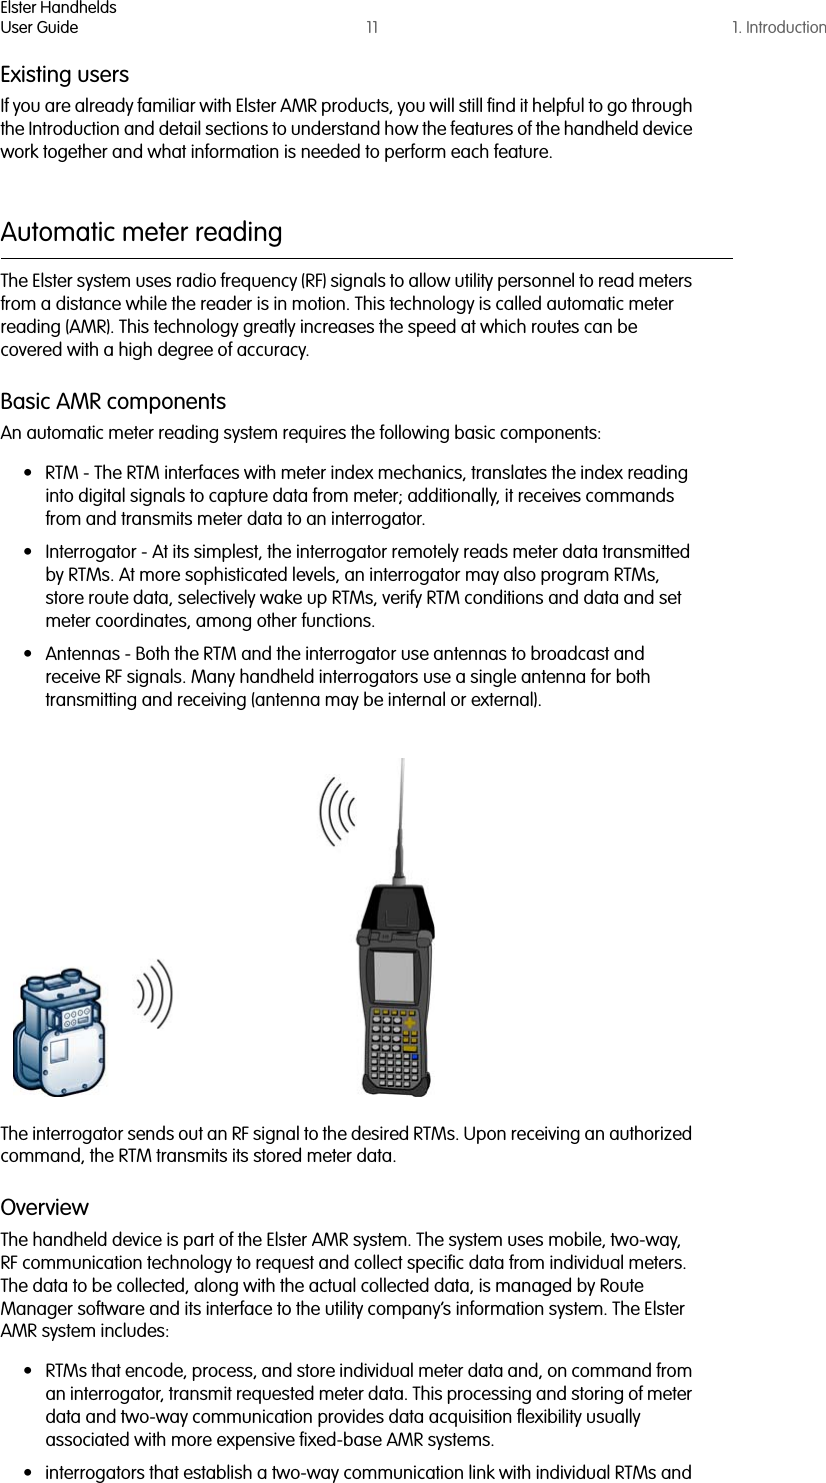 Elster HandheldsUser Guide 11 1. IntroductionExisting usersIf you are already familiar with Elster AMR products, you will still find it helpful to go through the Introduction and detail sections to understand how the features of the handheld device work together and what information is needed to perform each feature.Automatic meter readingThe Elster system uses radio frequency (RF) signals to allow utility personnel to read meters from a distance while the reader is in motion. This technology is called automatic meter reading (AMR). This technology greatly increases the speed at which routes can be covered with a high degree of accuracy.Basic AMR componentsAn automatic meter reading system requires the following basic components:• RTM - The RTM interfaces with meter index mechanics, translates the index reading into digital signals to capture data from meter; additionally, it receives commands from and transmits meter data to an interrogator.• Interrogator - At its simplest, the interrogator remotely reads meter data transmitted by RTMs. At more sophisticated levels, an interrogator may also program RTMs, store route data, selectively wake up RTMs, verify RTM conditions and data and set meter coordinates, among other functions.• Antennas - Both the RTM and the interrogator use antennas to broadcast and receive RF signals. Many handheld interrogators use a single antenna for both transmitting and receiving (antenna may be internal or external).The interrogator sends out an RF signal to the desired RTMs. Upon receiving an authorized command, the RTM transmits its stored meter data. OverviewThe handheld device is part of the Elster AMR system. The system uses mobile, two-way, RF communication technology to request and collect specific data from individual meters. The data to be collected, along with the actual collected data, is managed by Route Manager software and its interface to the utility company’s information system. The Elster AMR system includes:• RTMs that encode, process, and store individual meter data and, on command from an interrogator, transmit requested meter data. This processing and storing of meter data and two-way communication provides data acquisition flexibility usually associated with more expensive fixed-base AMR systems.• interrogators that establish a two-way communication link with individual RTMs and 